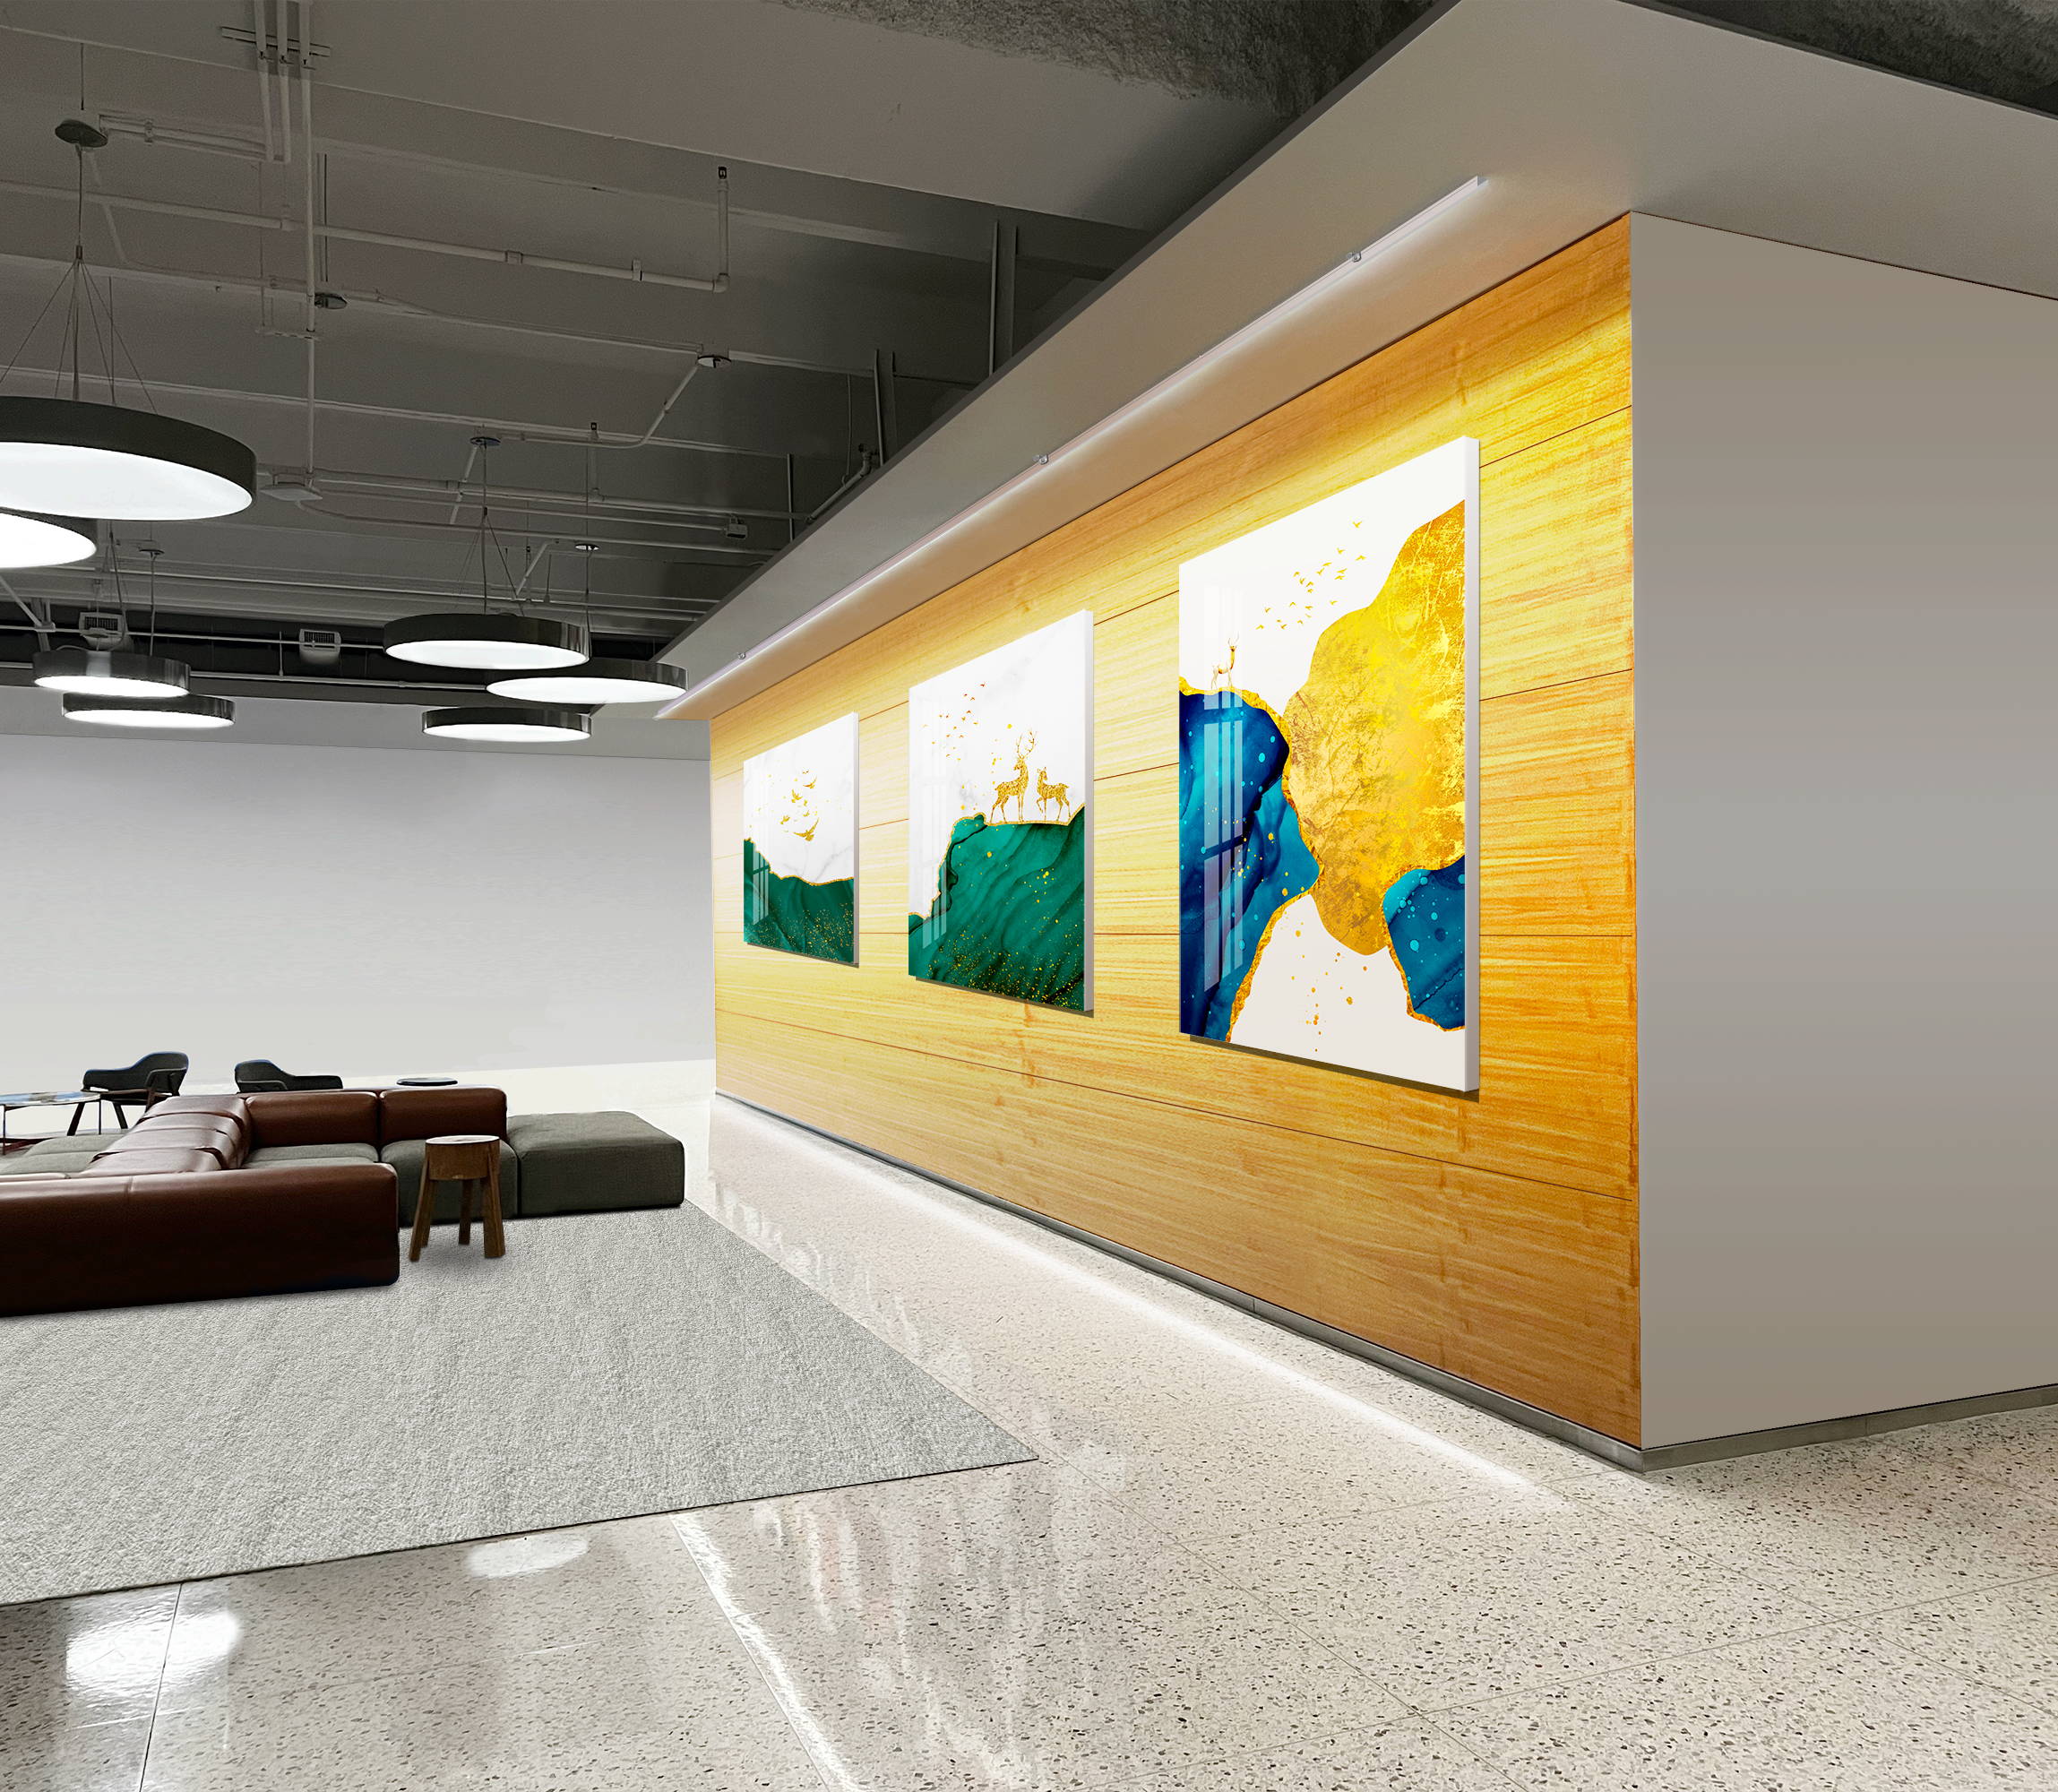 A wall with three art pieces is washed by a linear wall washing light from the top downward in a lounge area.